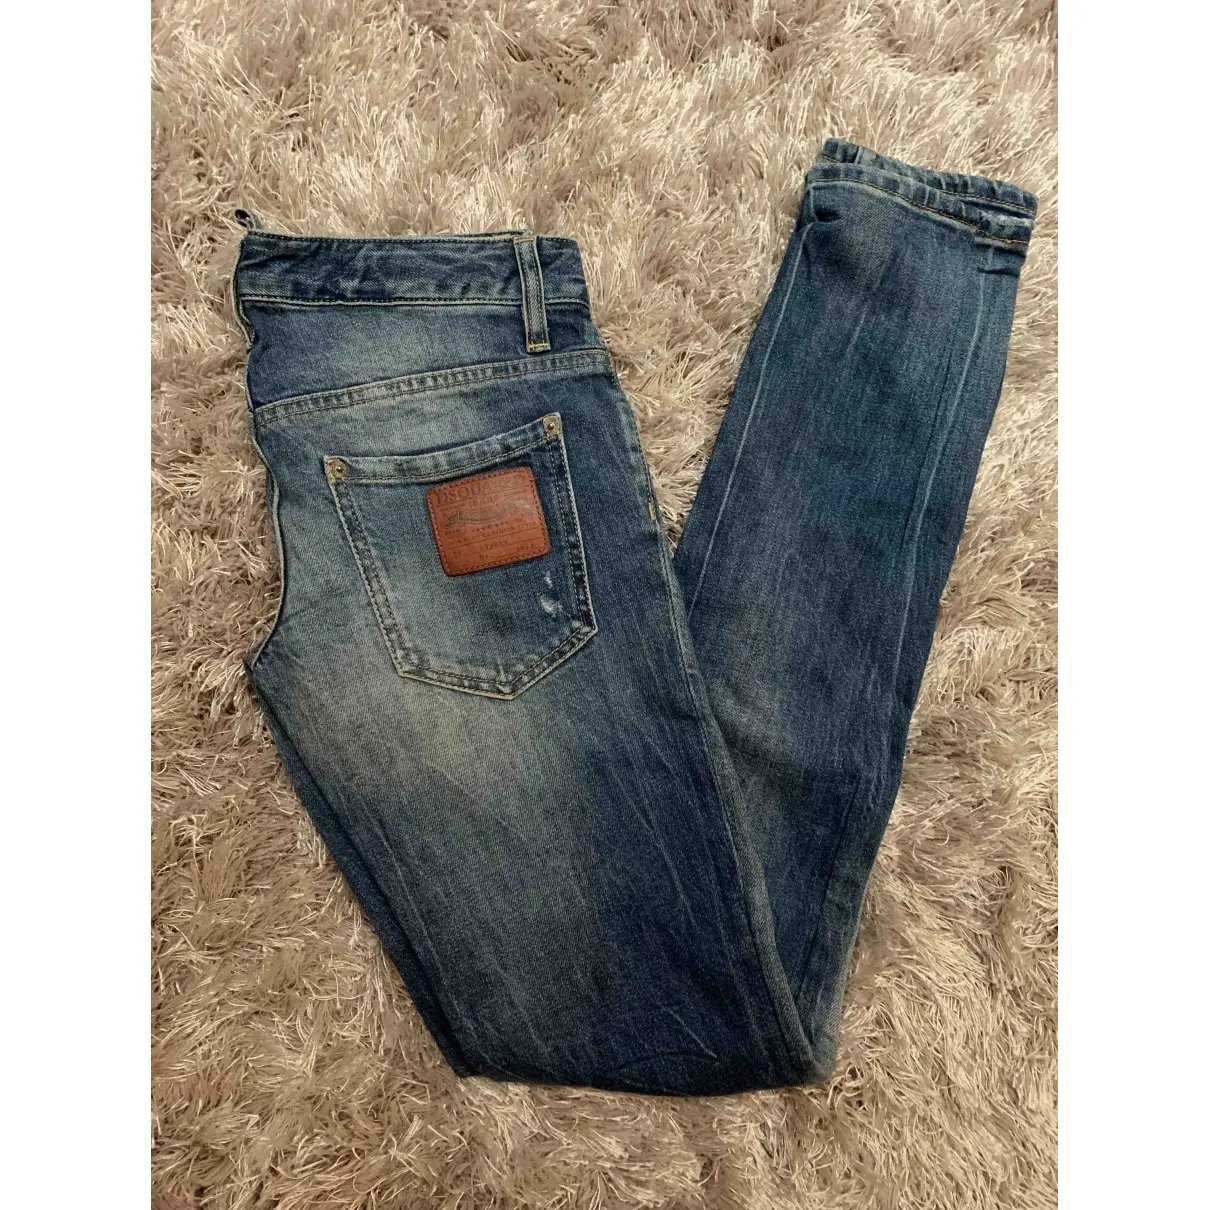 Dsquared2 Slim jeans for sale